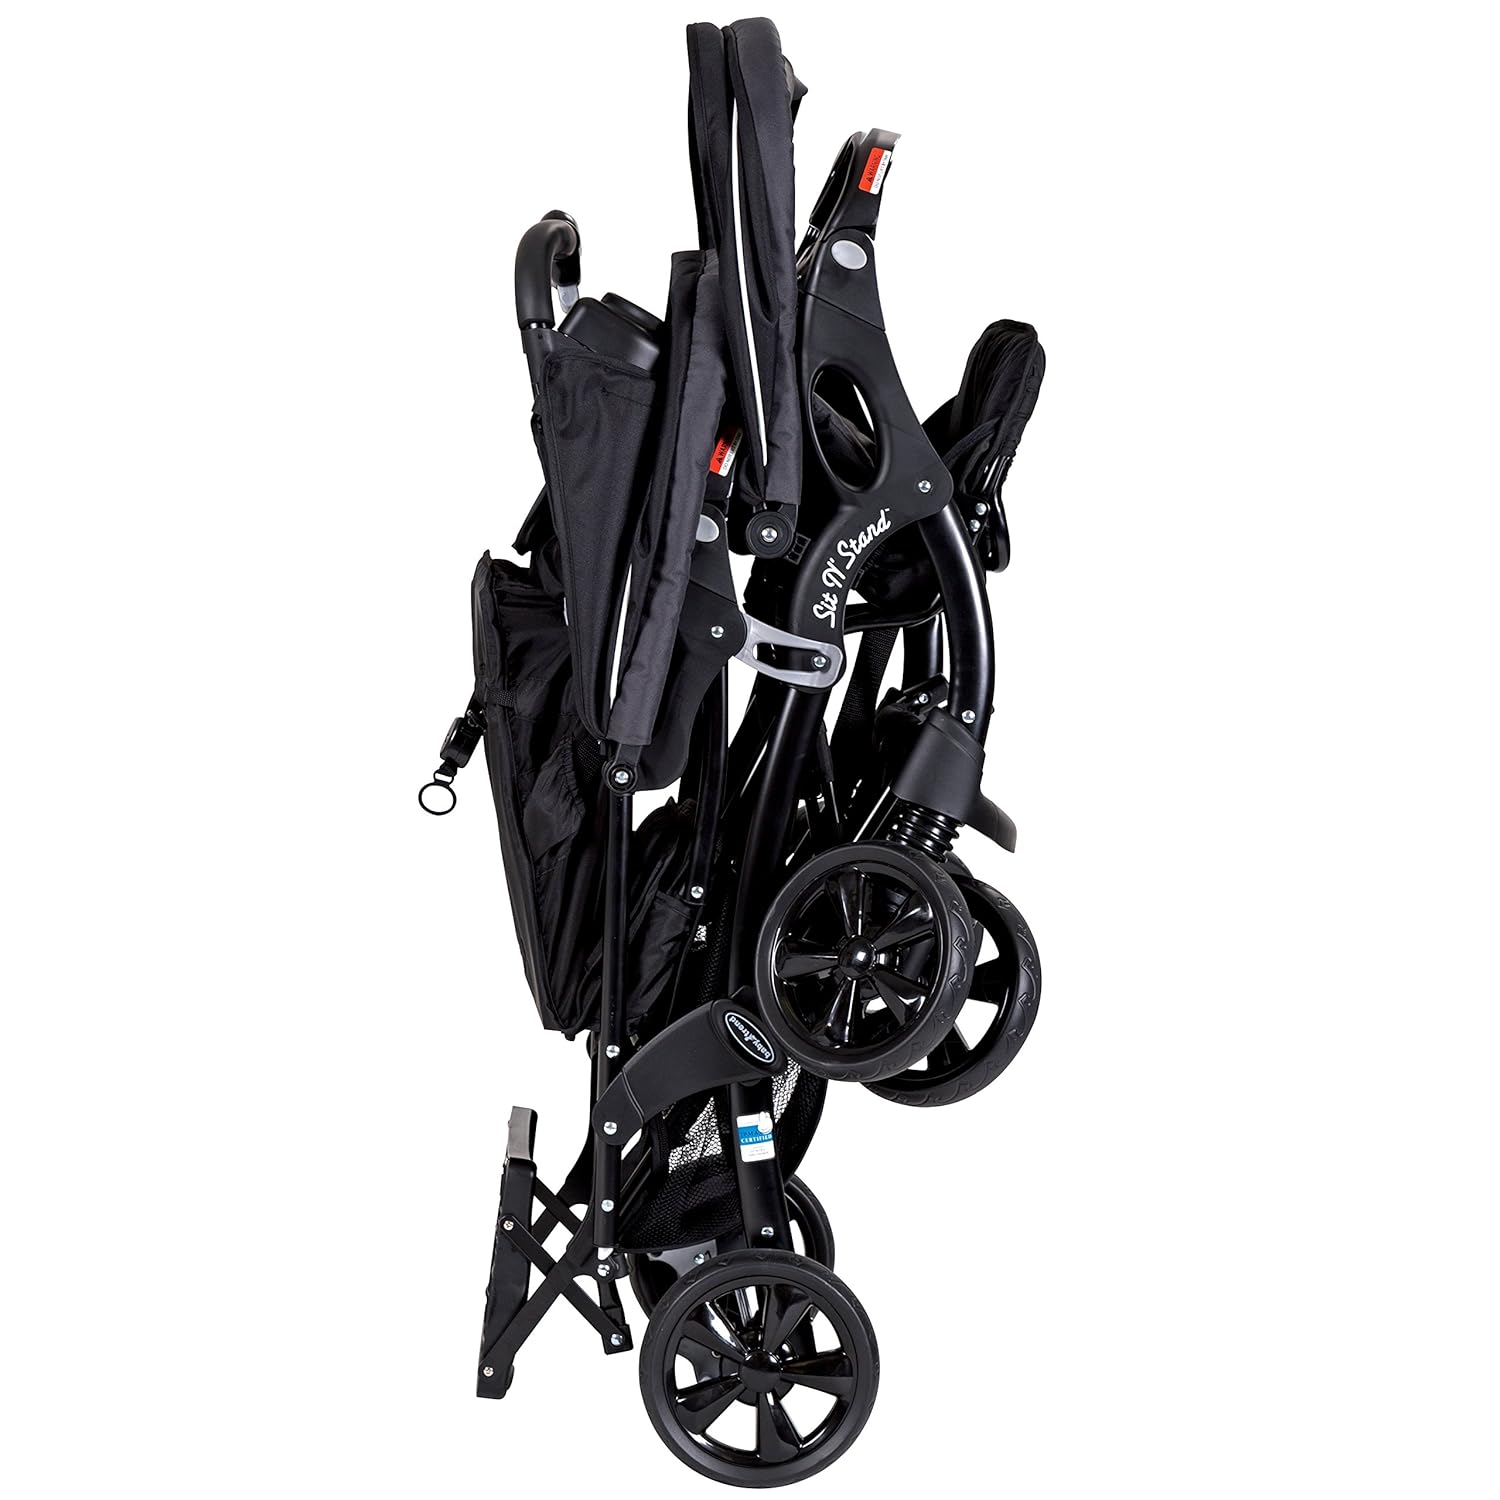 Baby Trend Sit N Stand Double Stroller, Onyx - Baby Trend Sit N' Stand Double Stroller Onyx Review